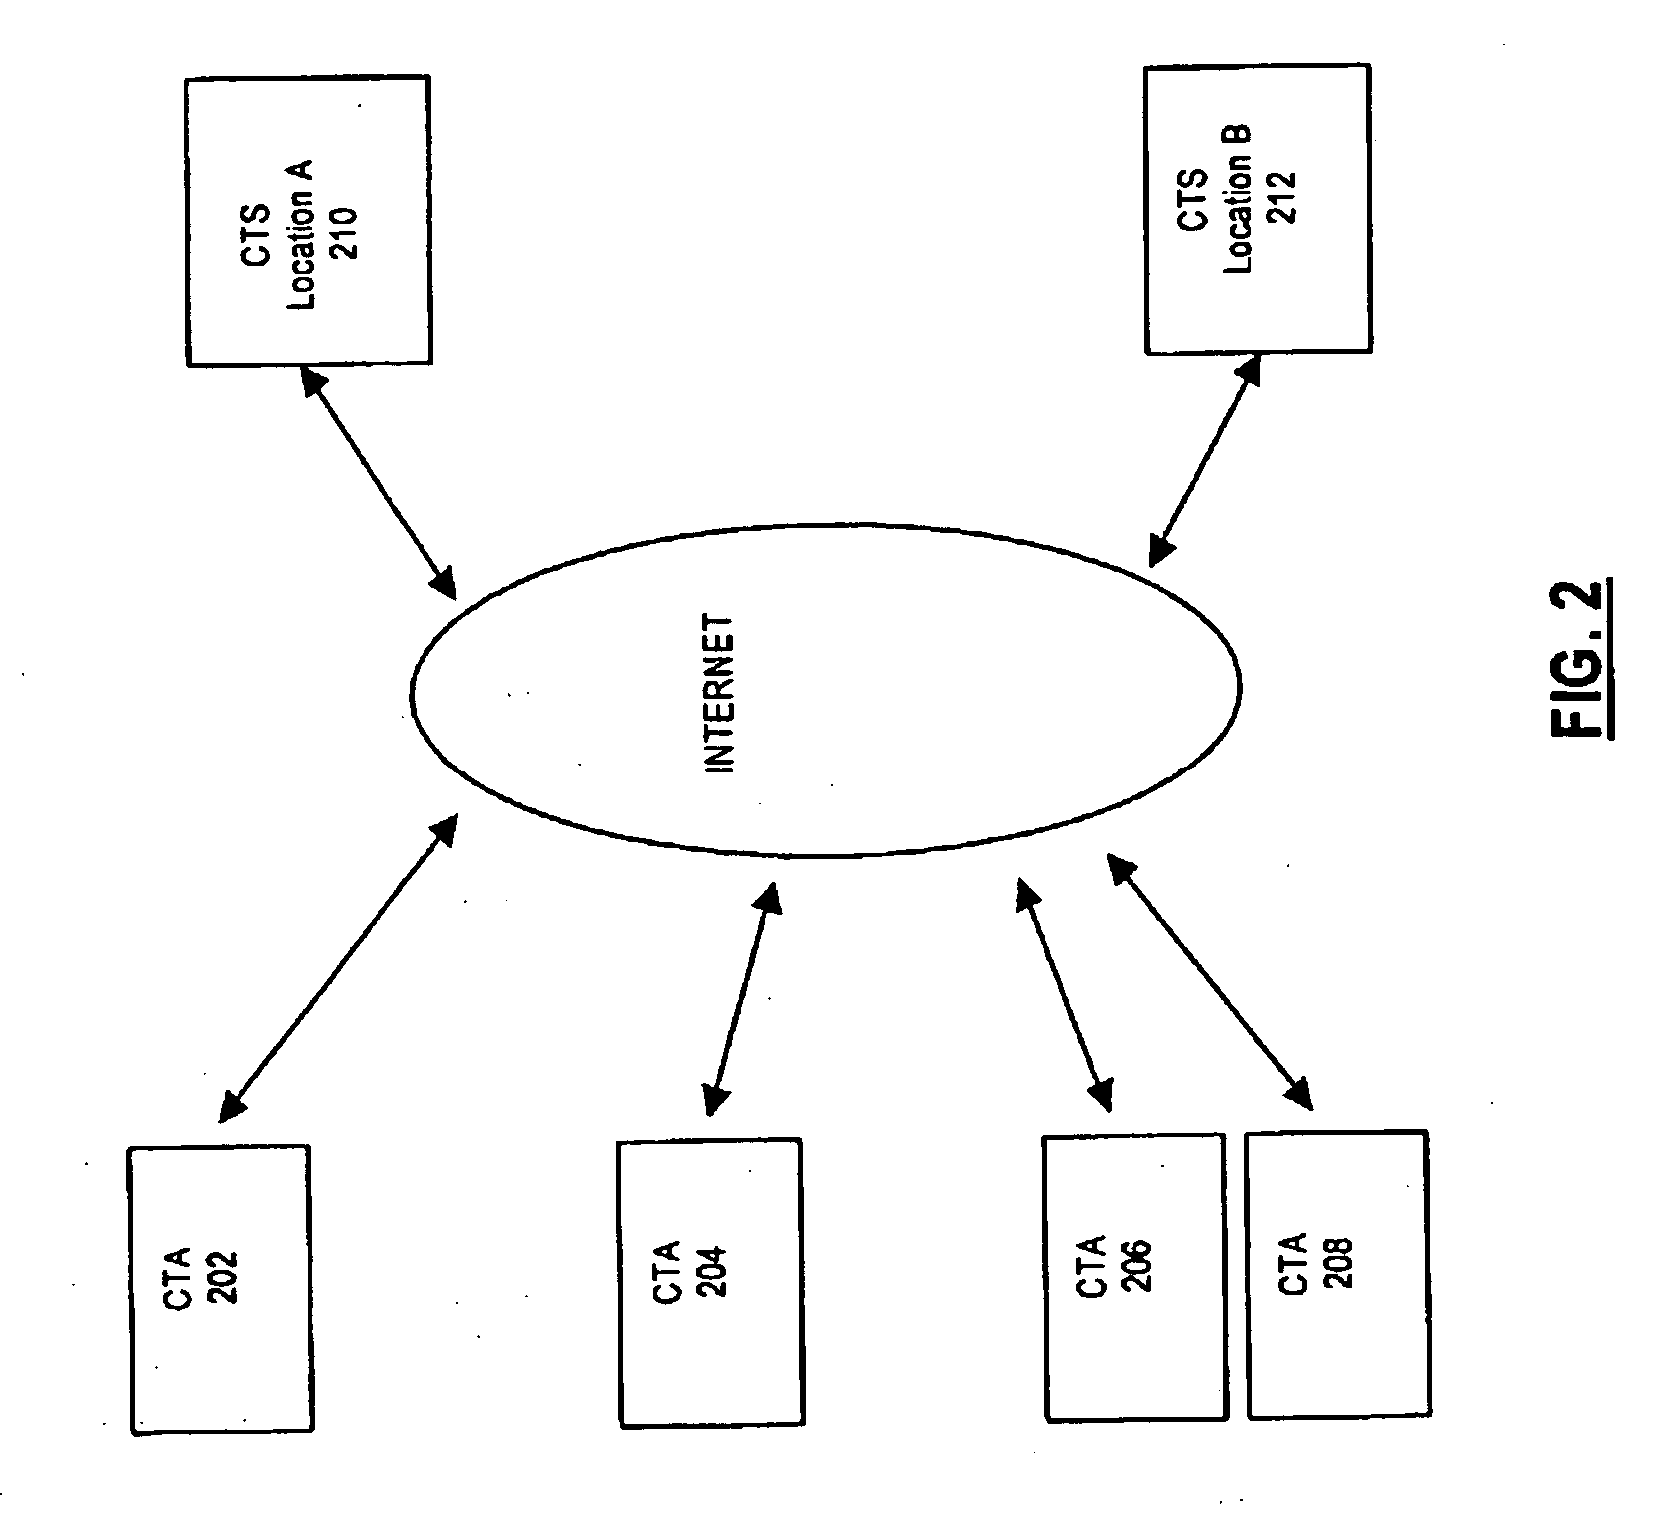 Method and system for filtering and suppression of telemetry data